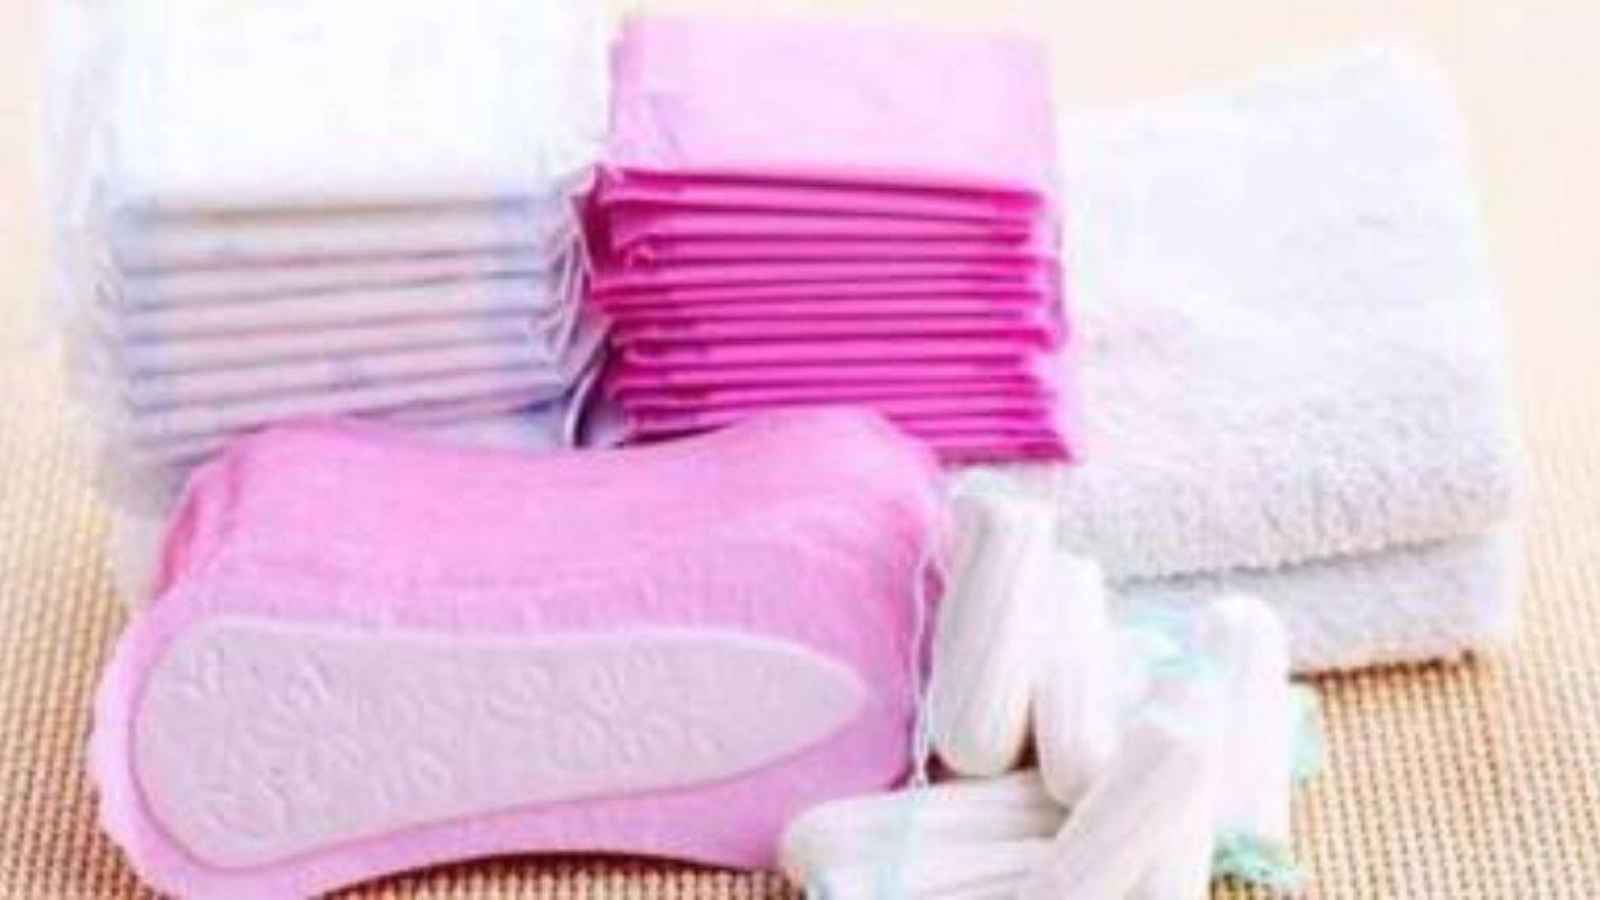 Telangana to distribute 33 lakh sanitary napkins in schools, colleges